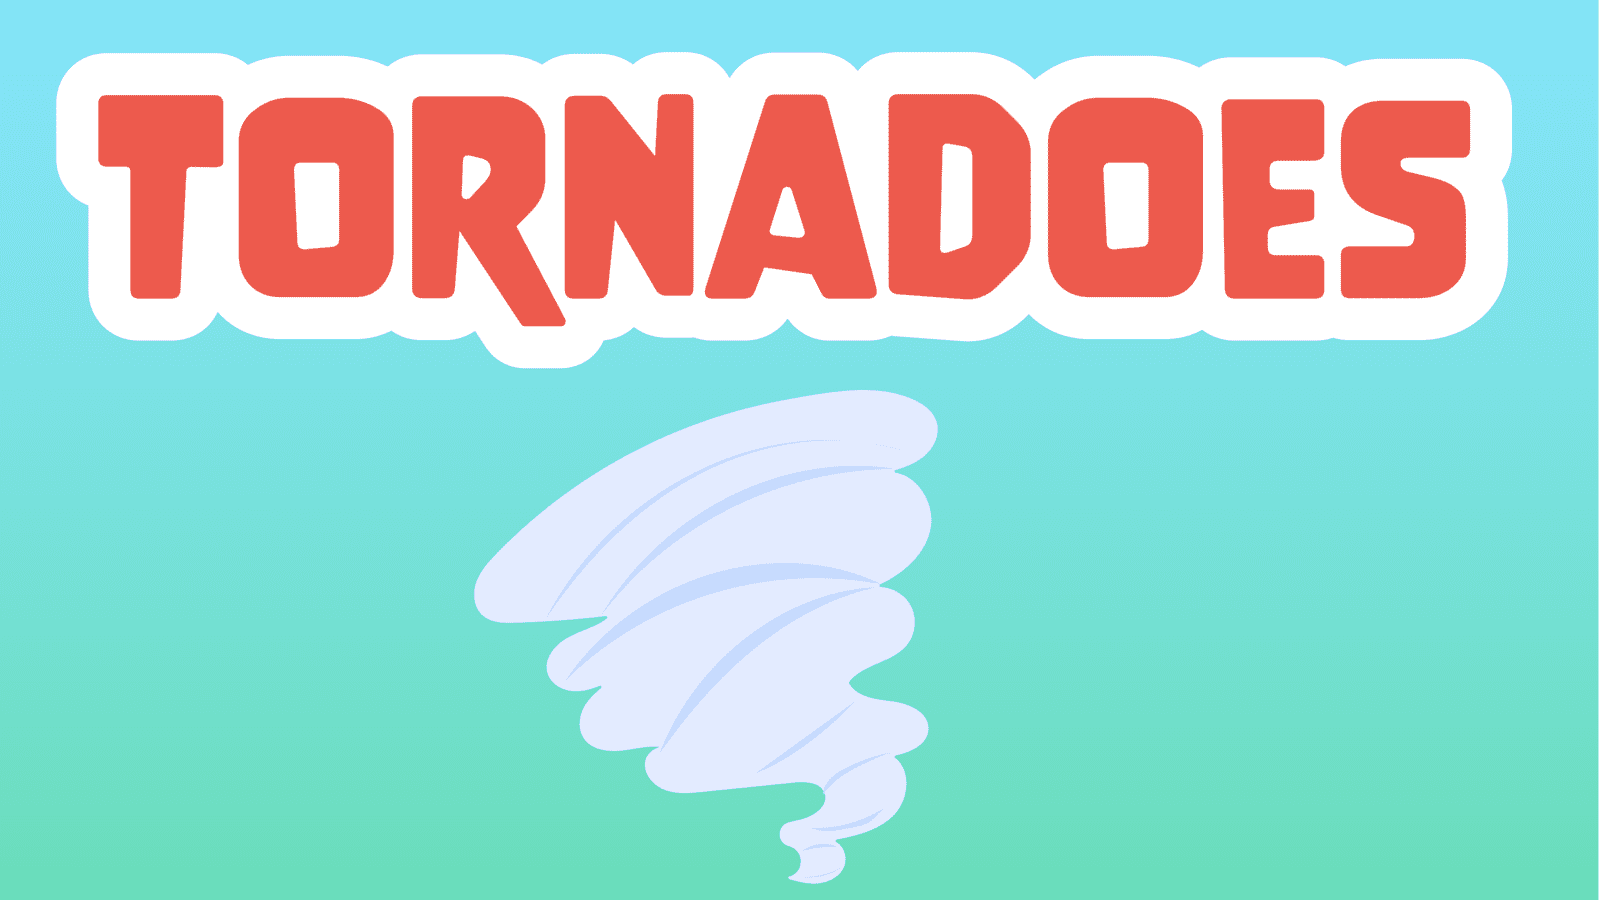 Tornadoes Facts for Kids – 5 Terrific Facts about Tornadoes